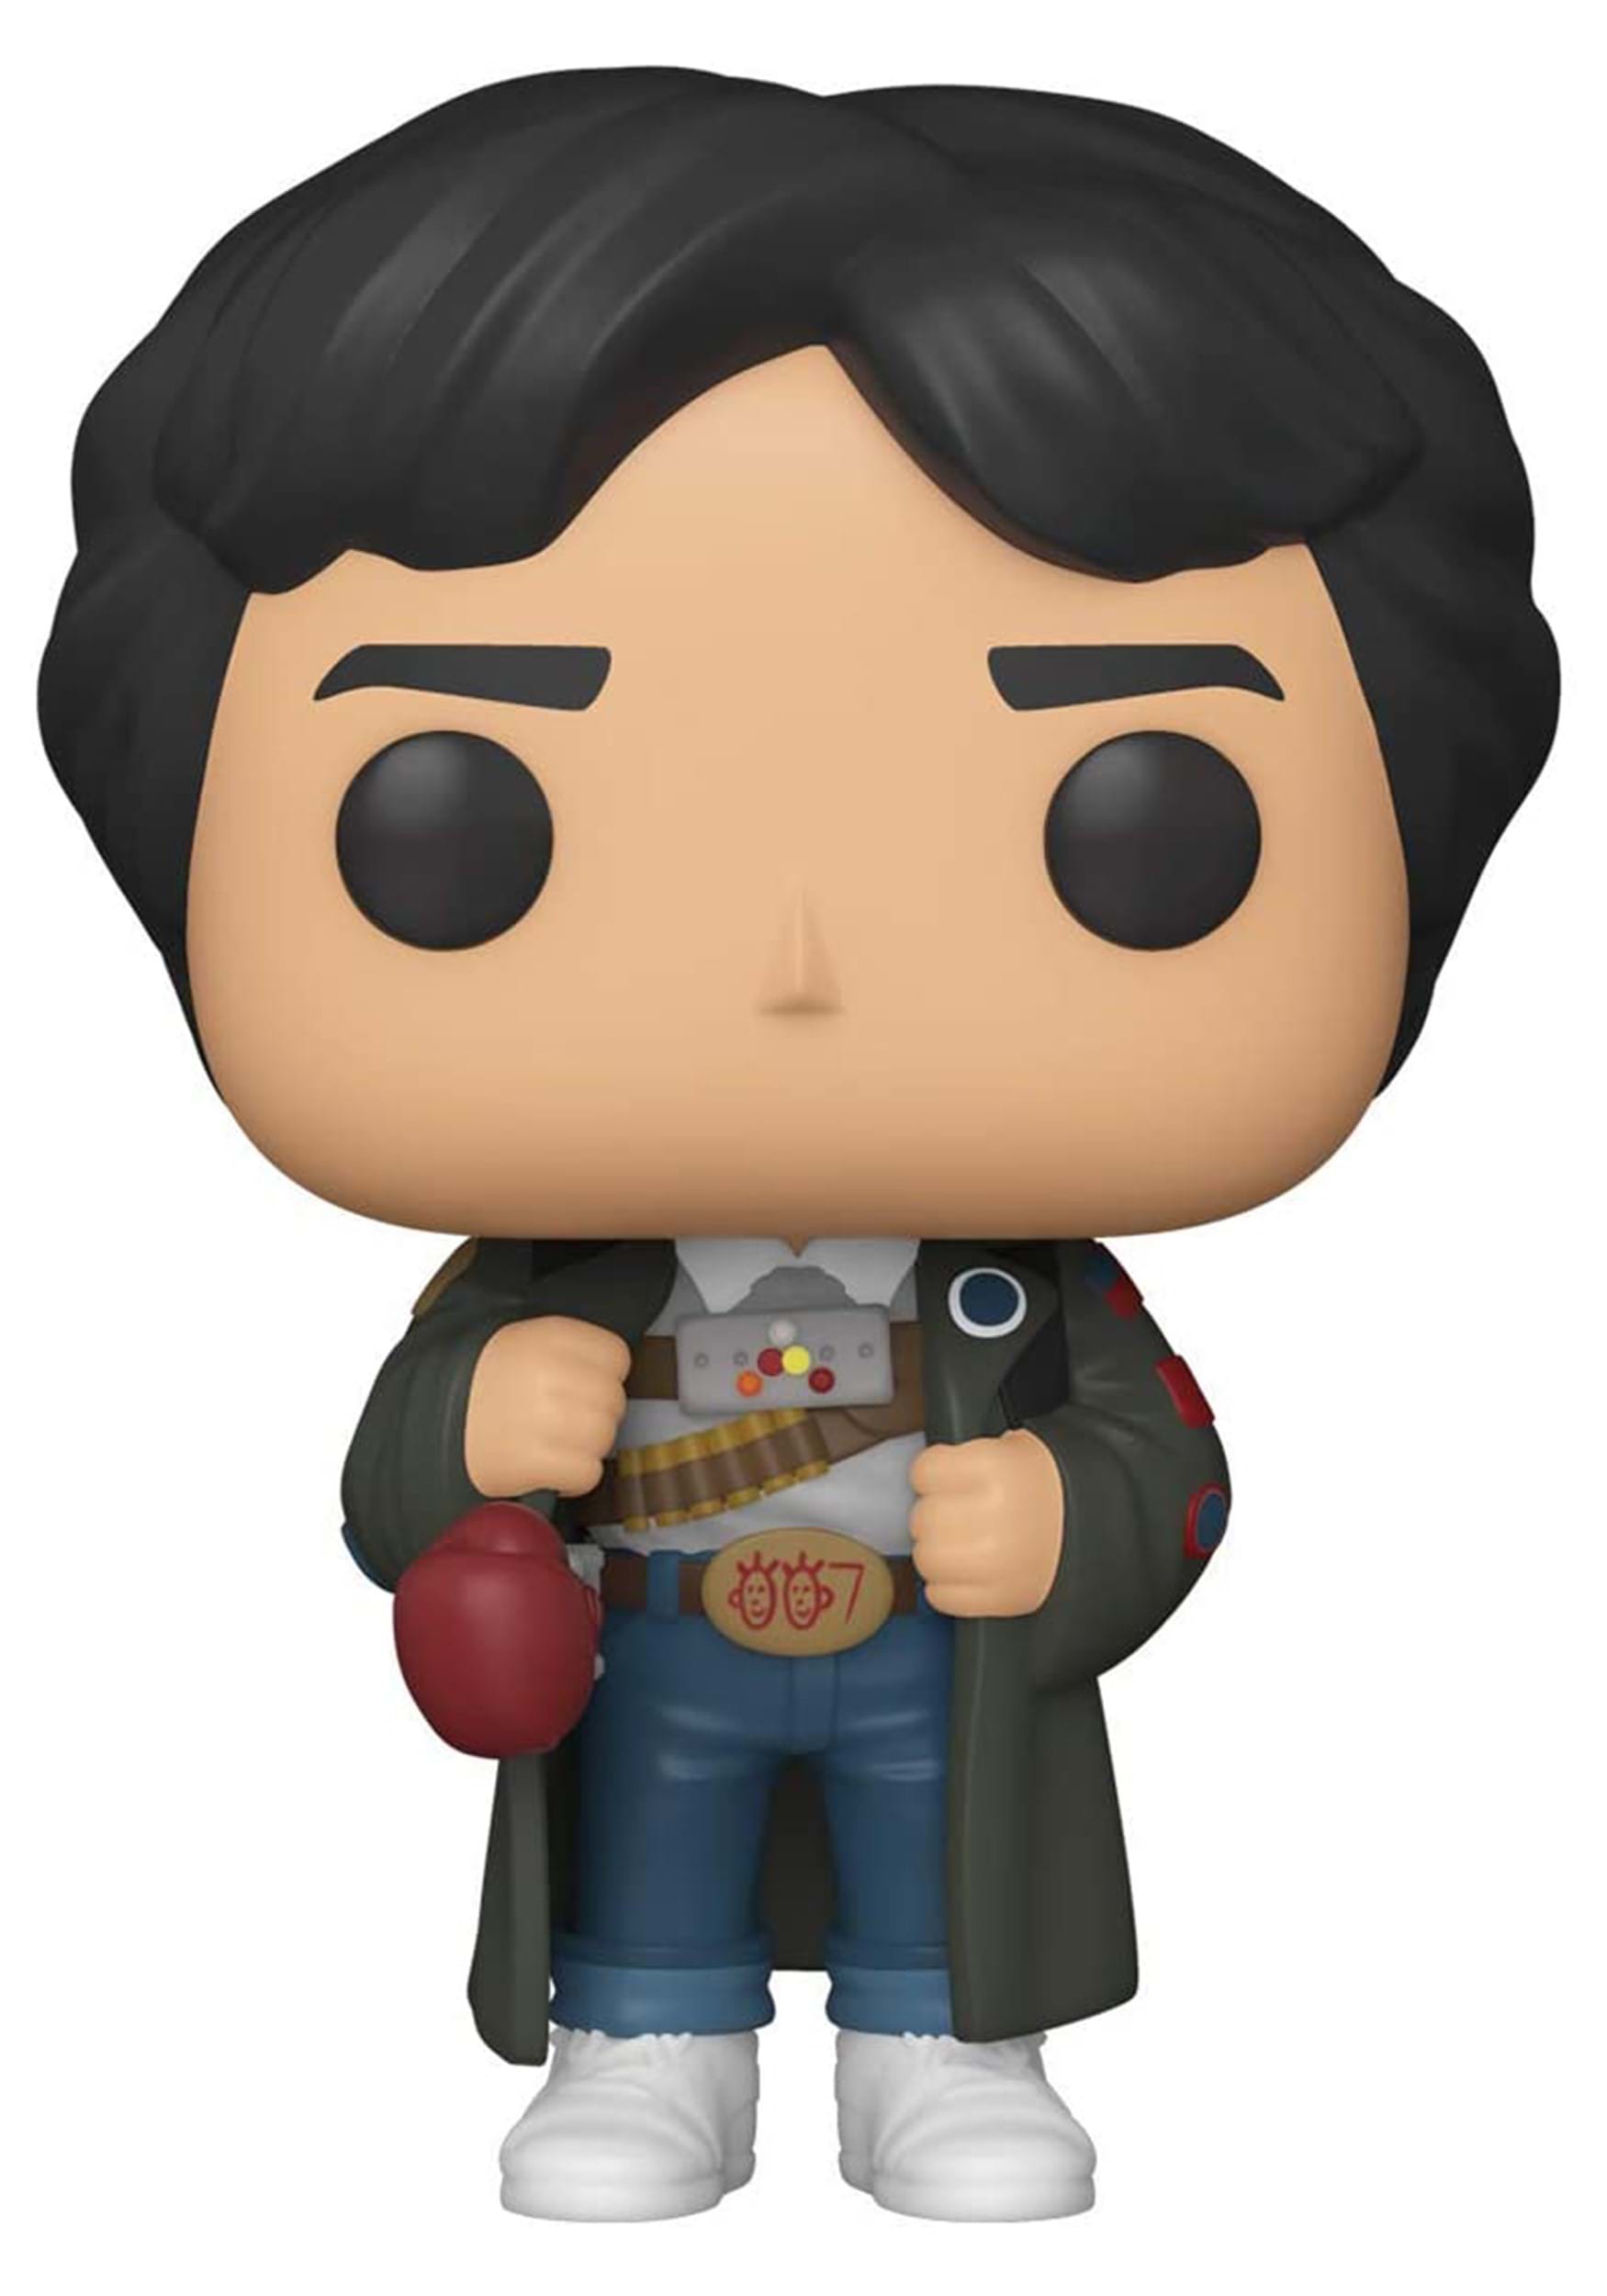 Funko POP! Movies: The Goonies- Data with Glove Punch Figure